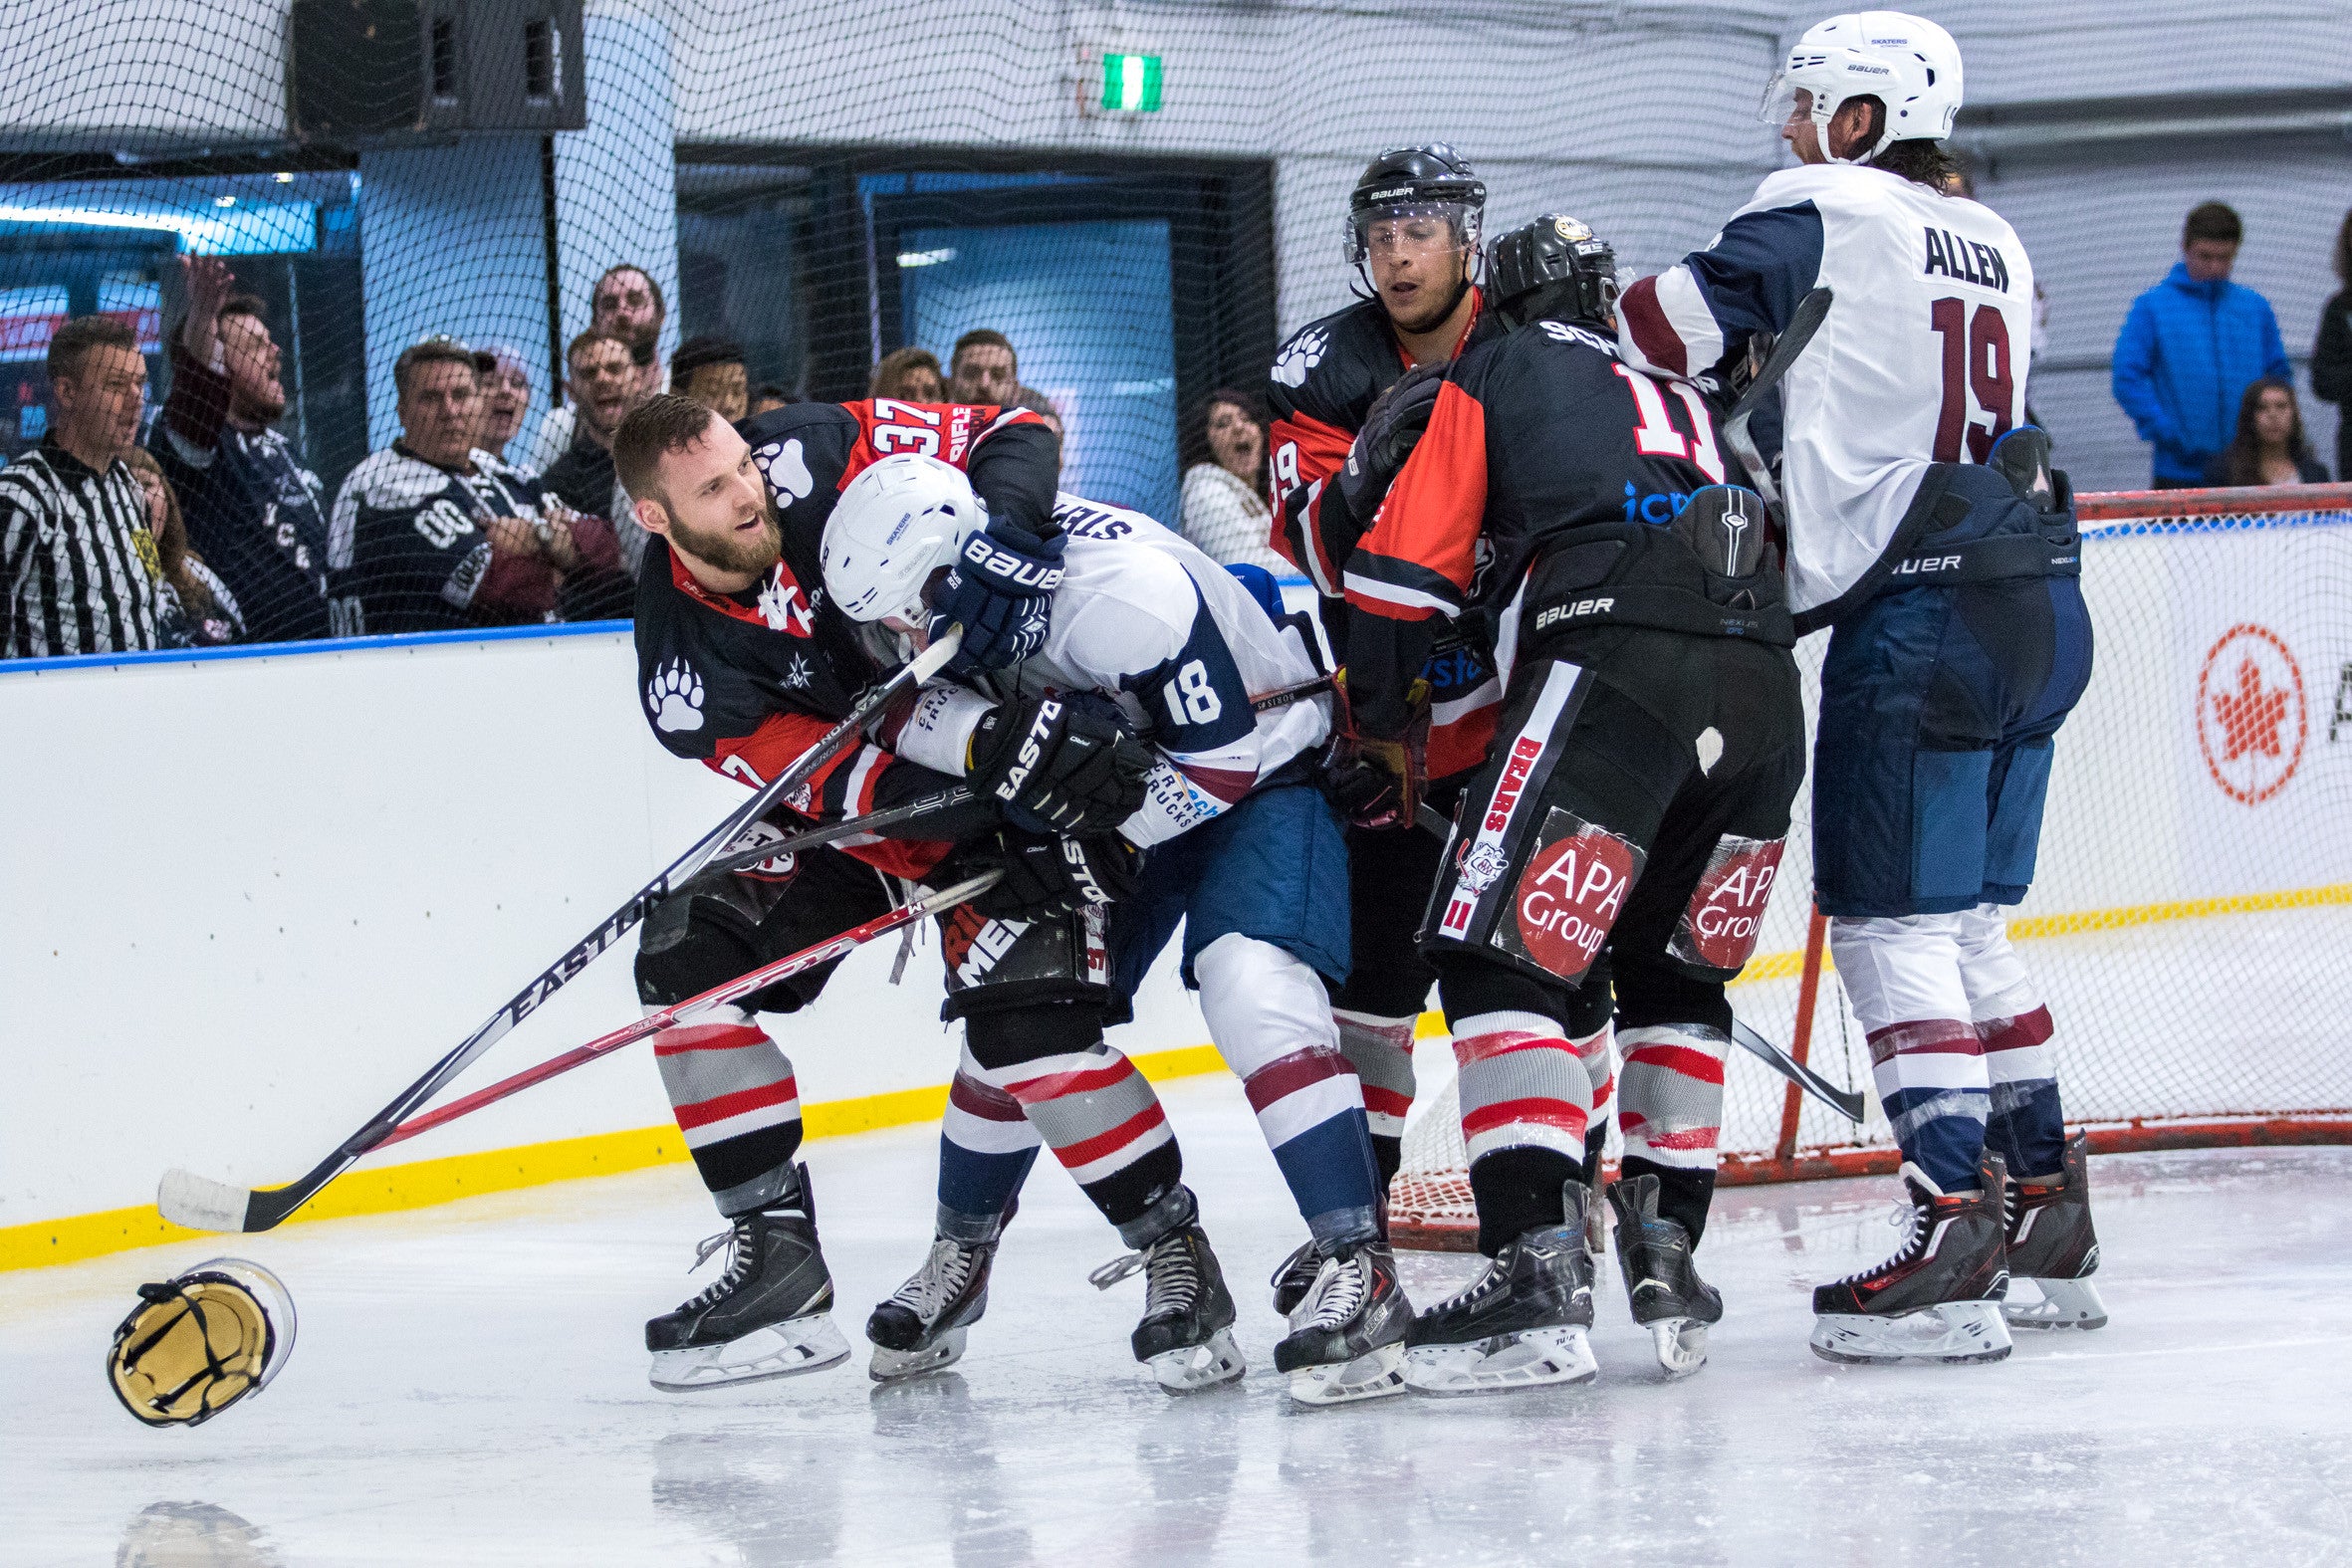 Game Preview: Sydney Bears vs Sydney Ice Dogs